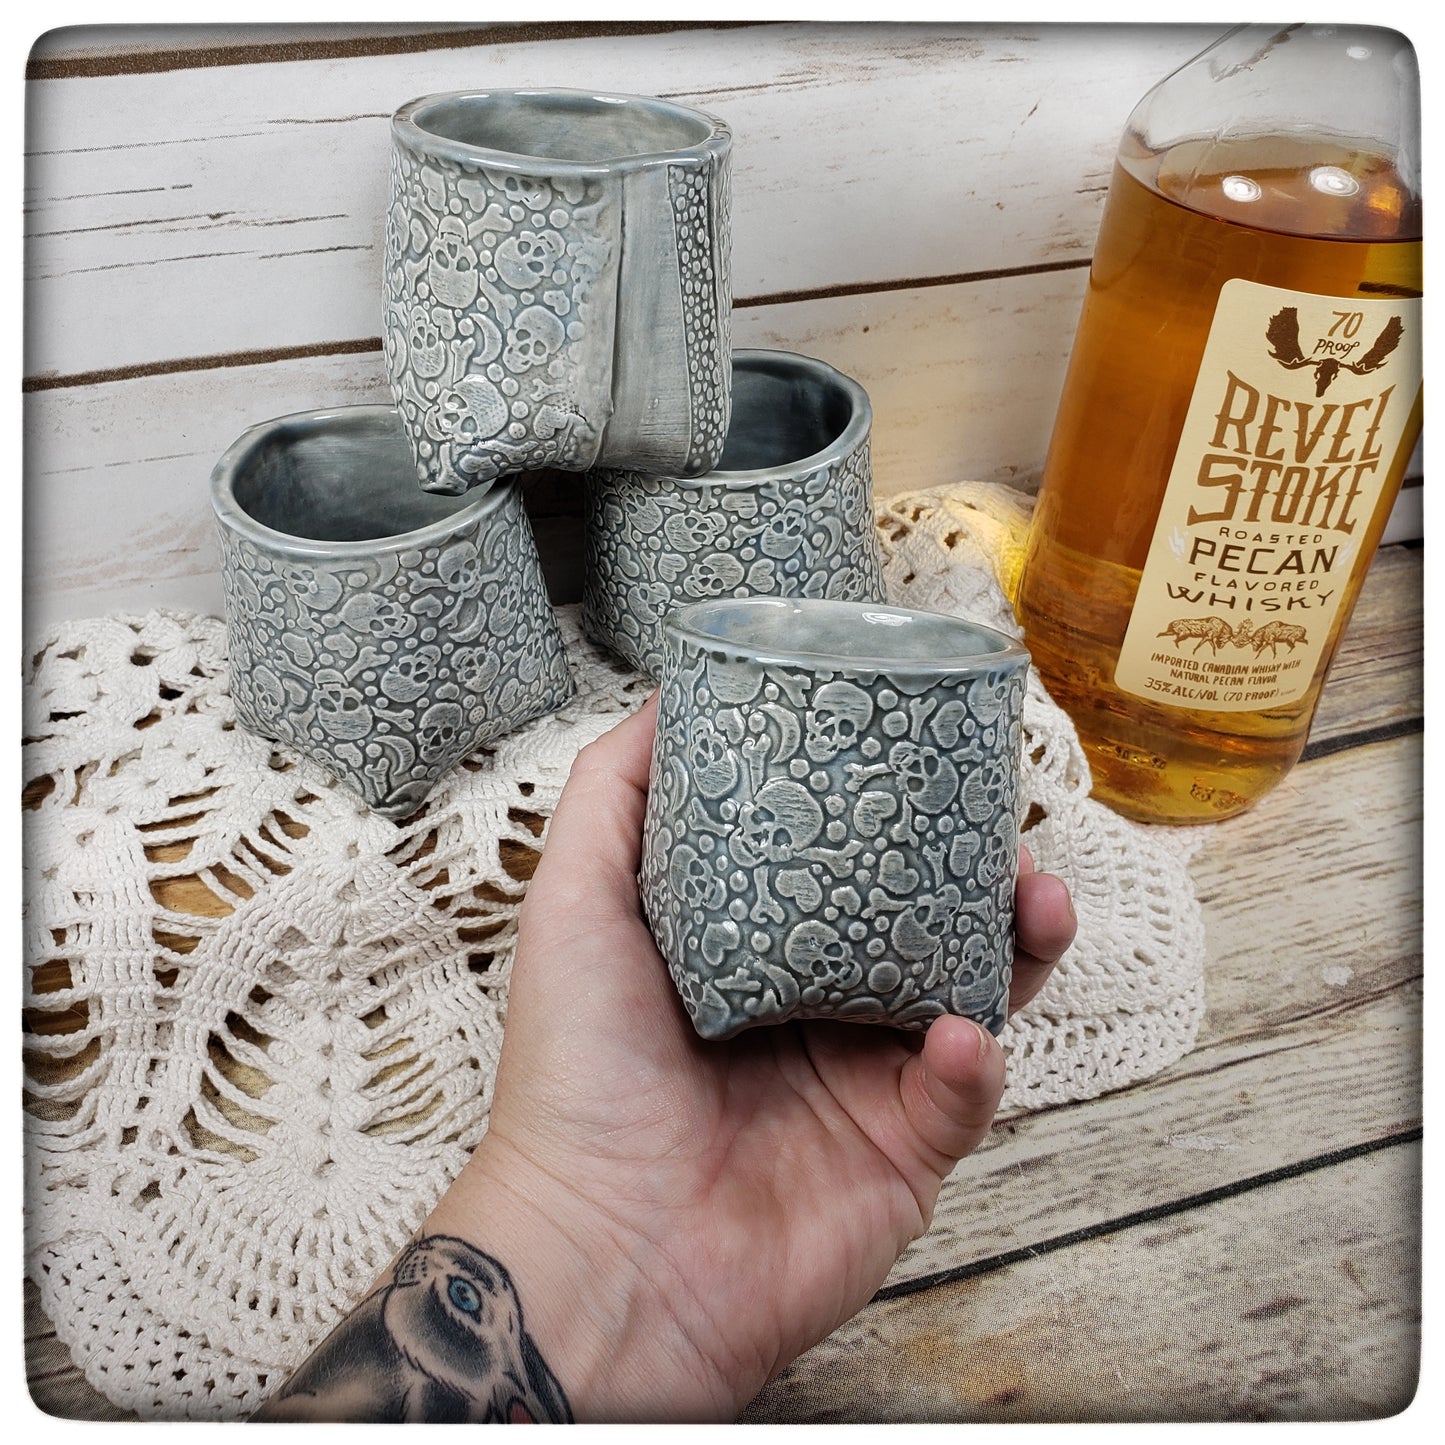 Skull whiskey cup